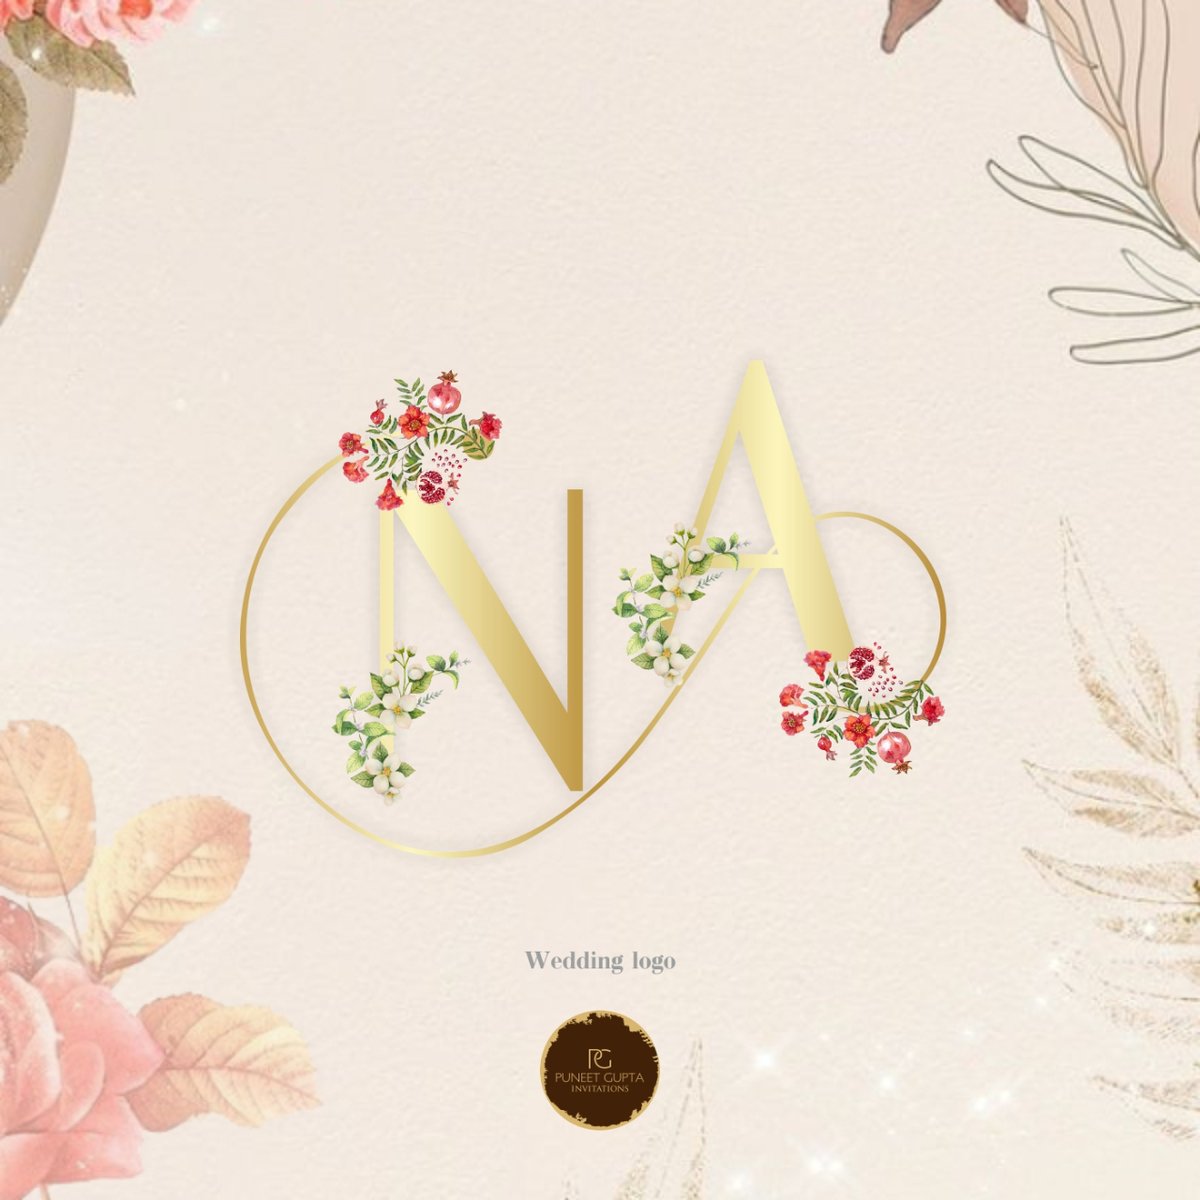 Garden of Love ~ Nikita & Akash
The dreamy and floral inspired look was carried forward in the save the date, wedding whatsappers and digital communication as well. Call: 9911116743

#PastelInvites #einvite #savethedate #evite #digitalinvite #floralInvite #floralwedding